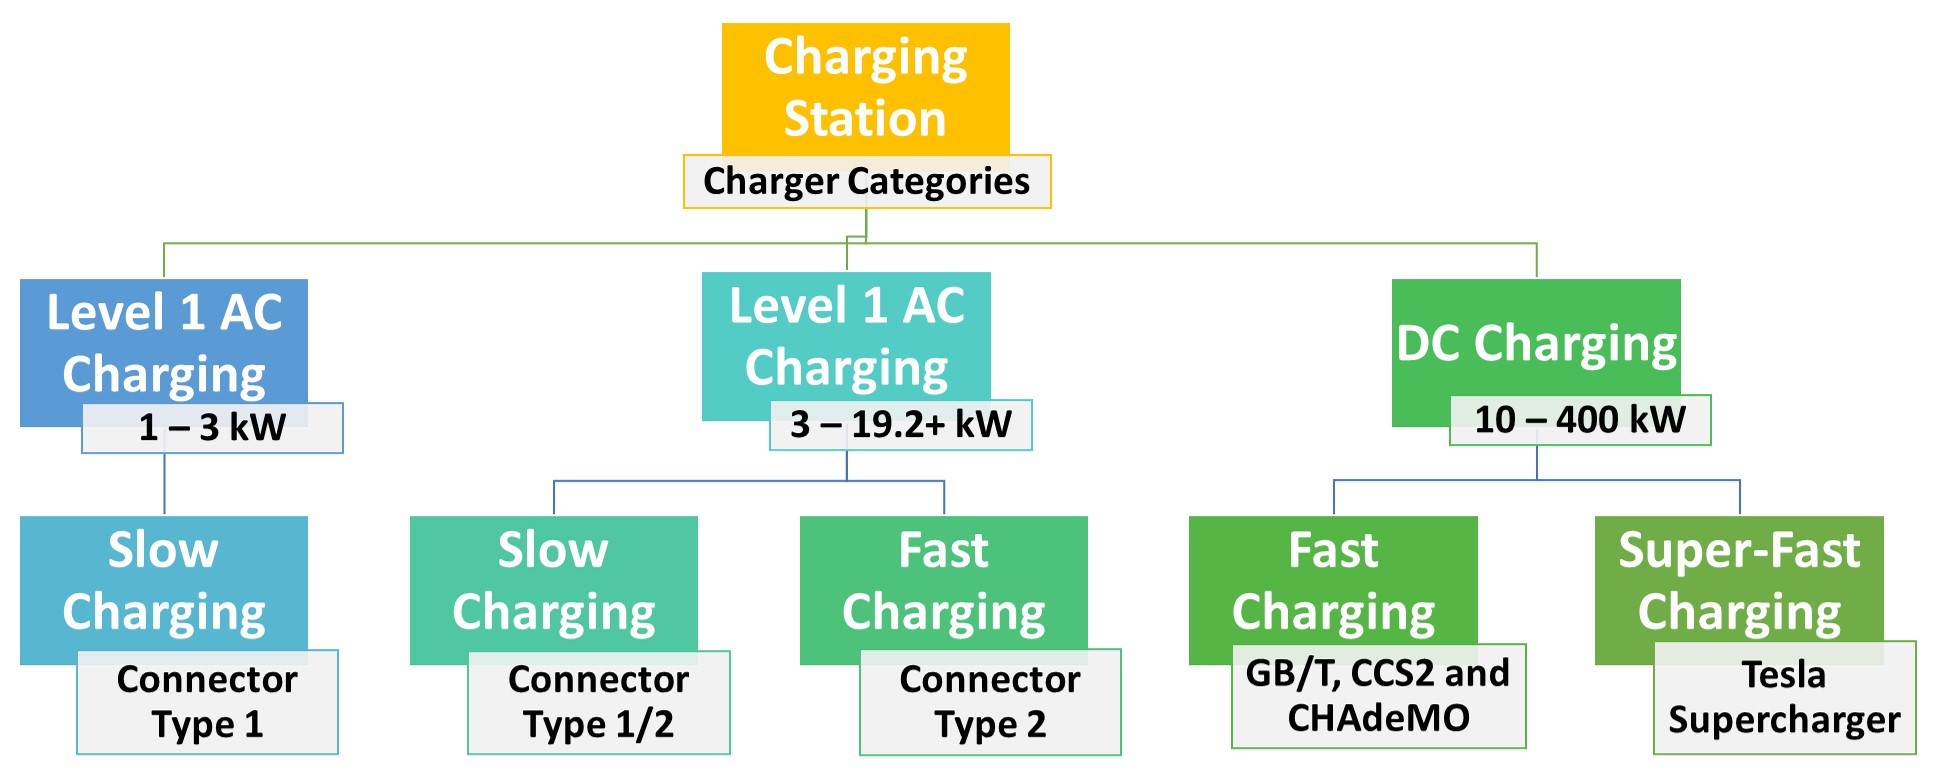 https://indiaesa.info/images/Classification_of_EV_Chargers.jpg